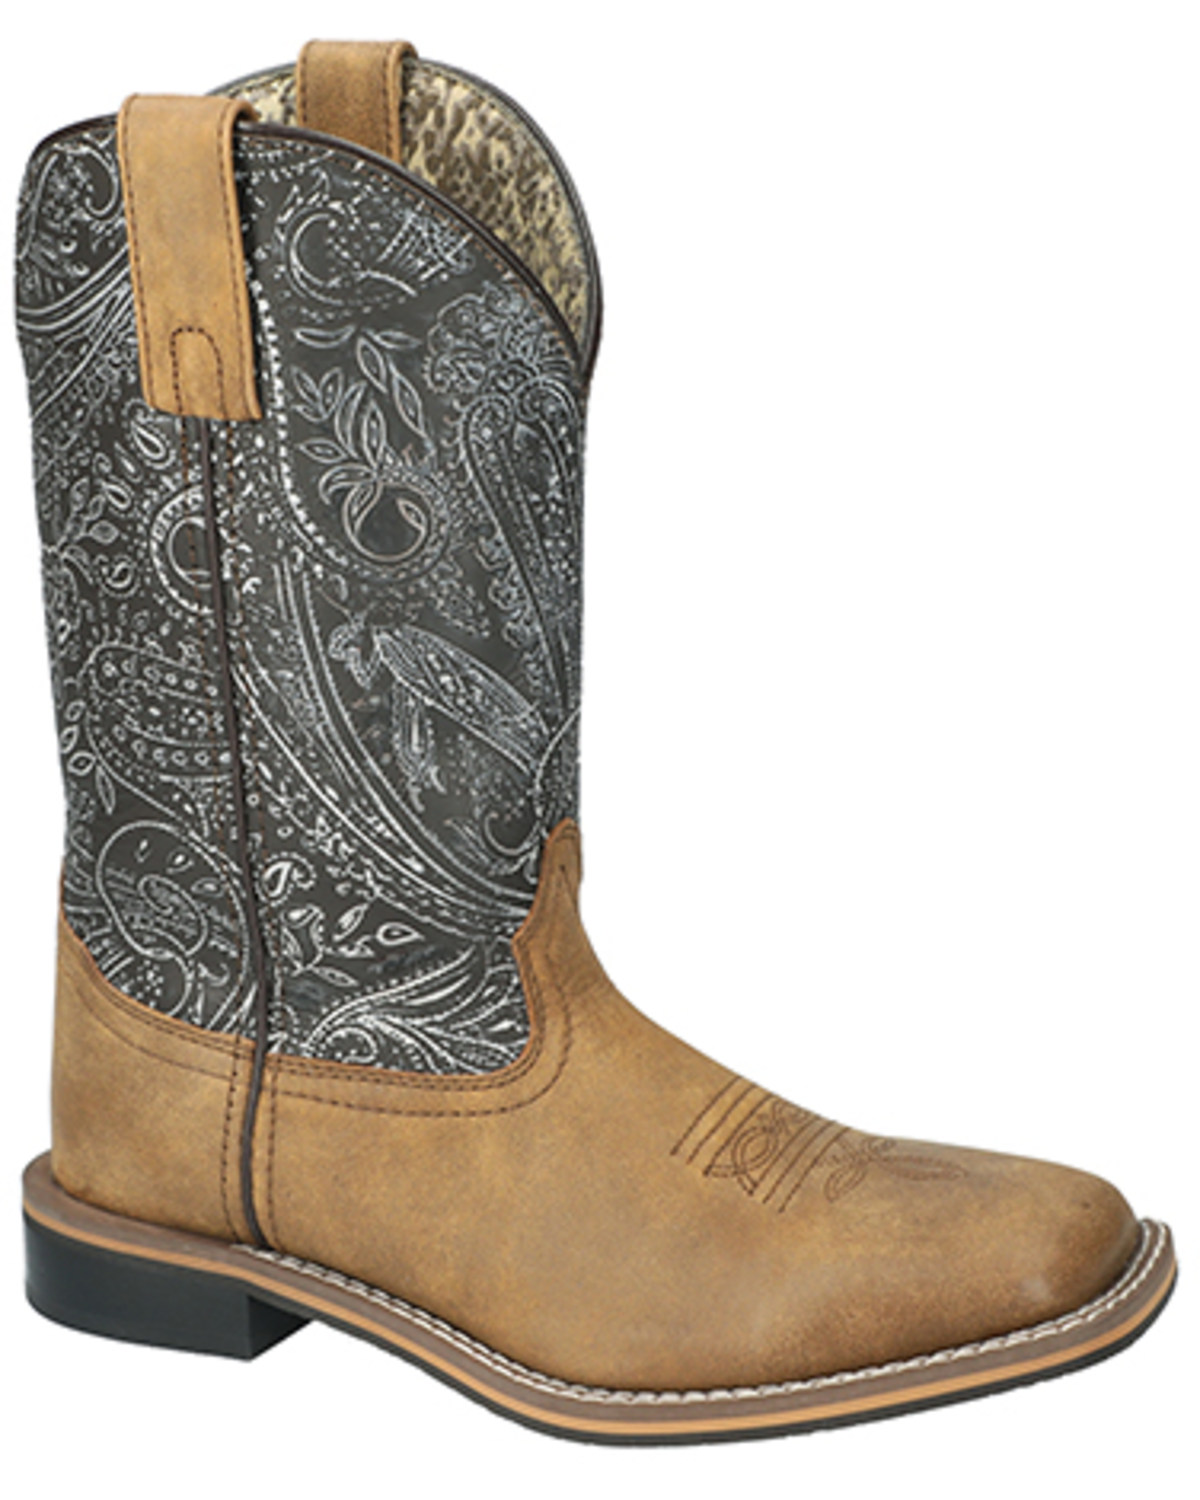 Smoky Mountain Women's Anslie Western Boots - Broad Square Toe